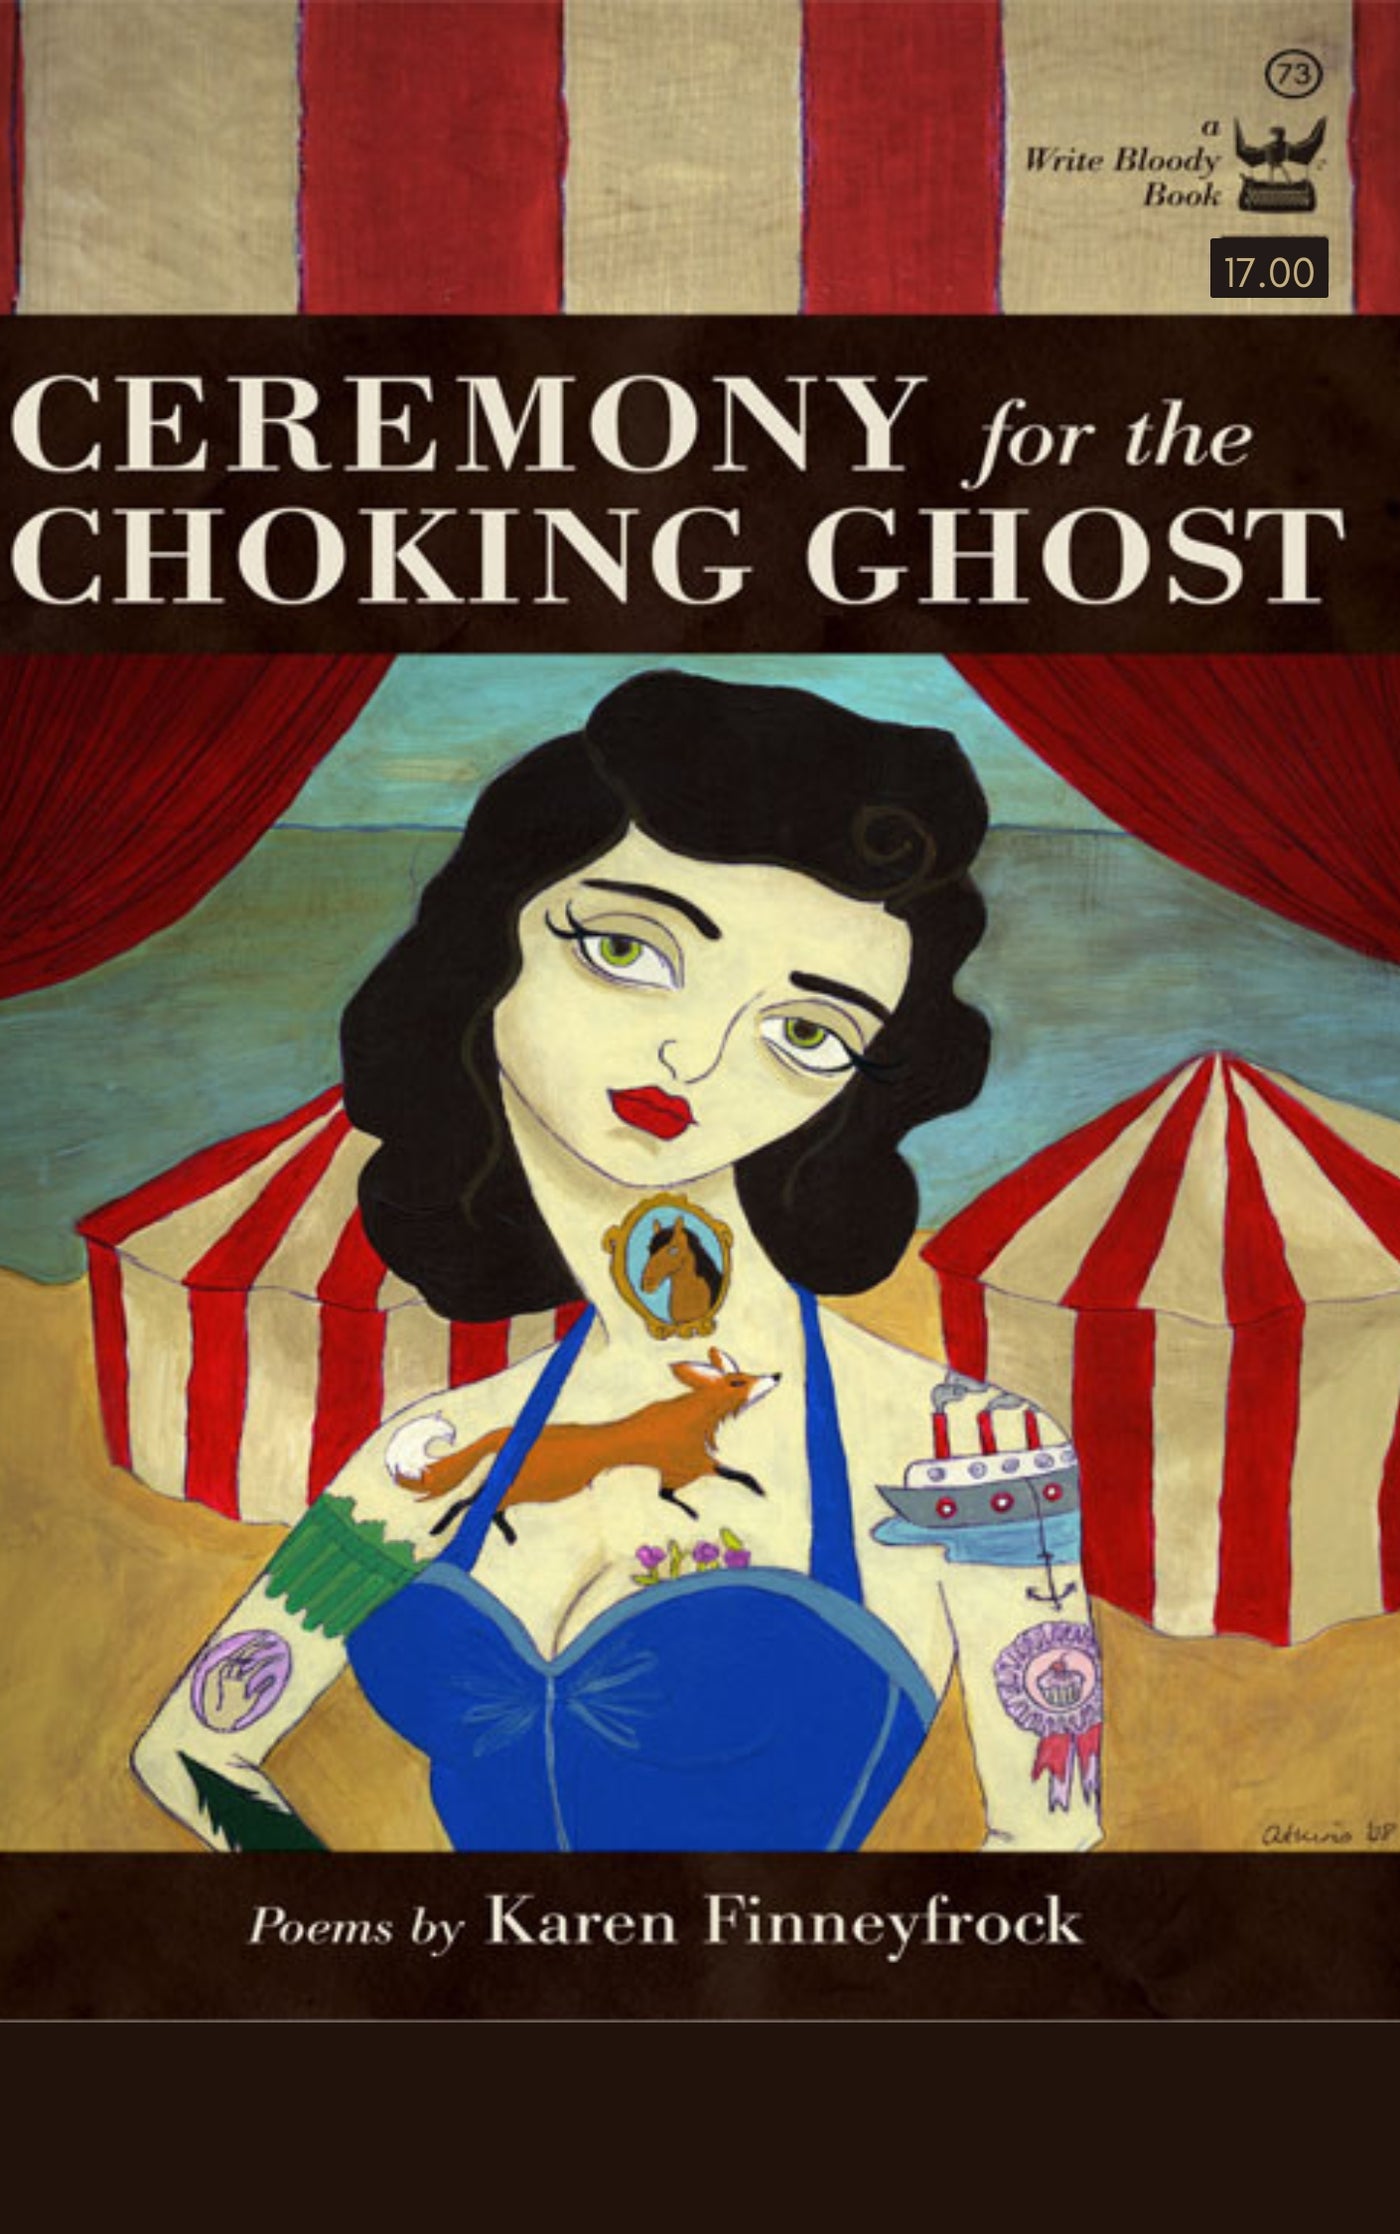 Ceremony for the Choking Ghost by Karen Finneyfrock